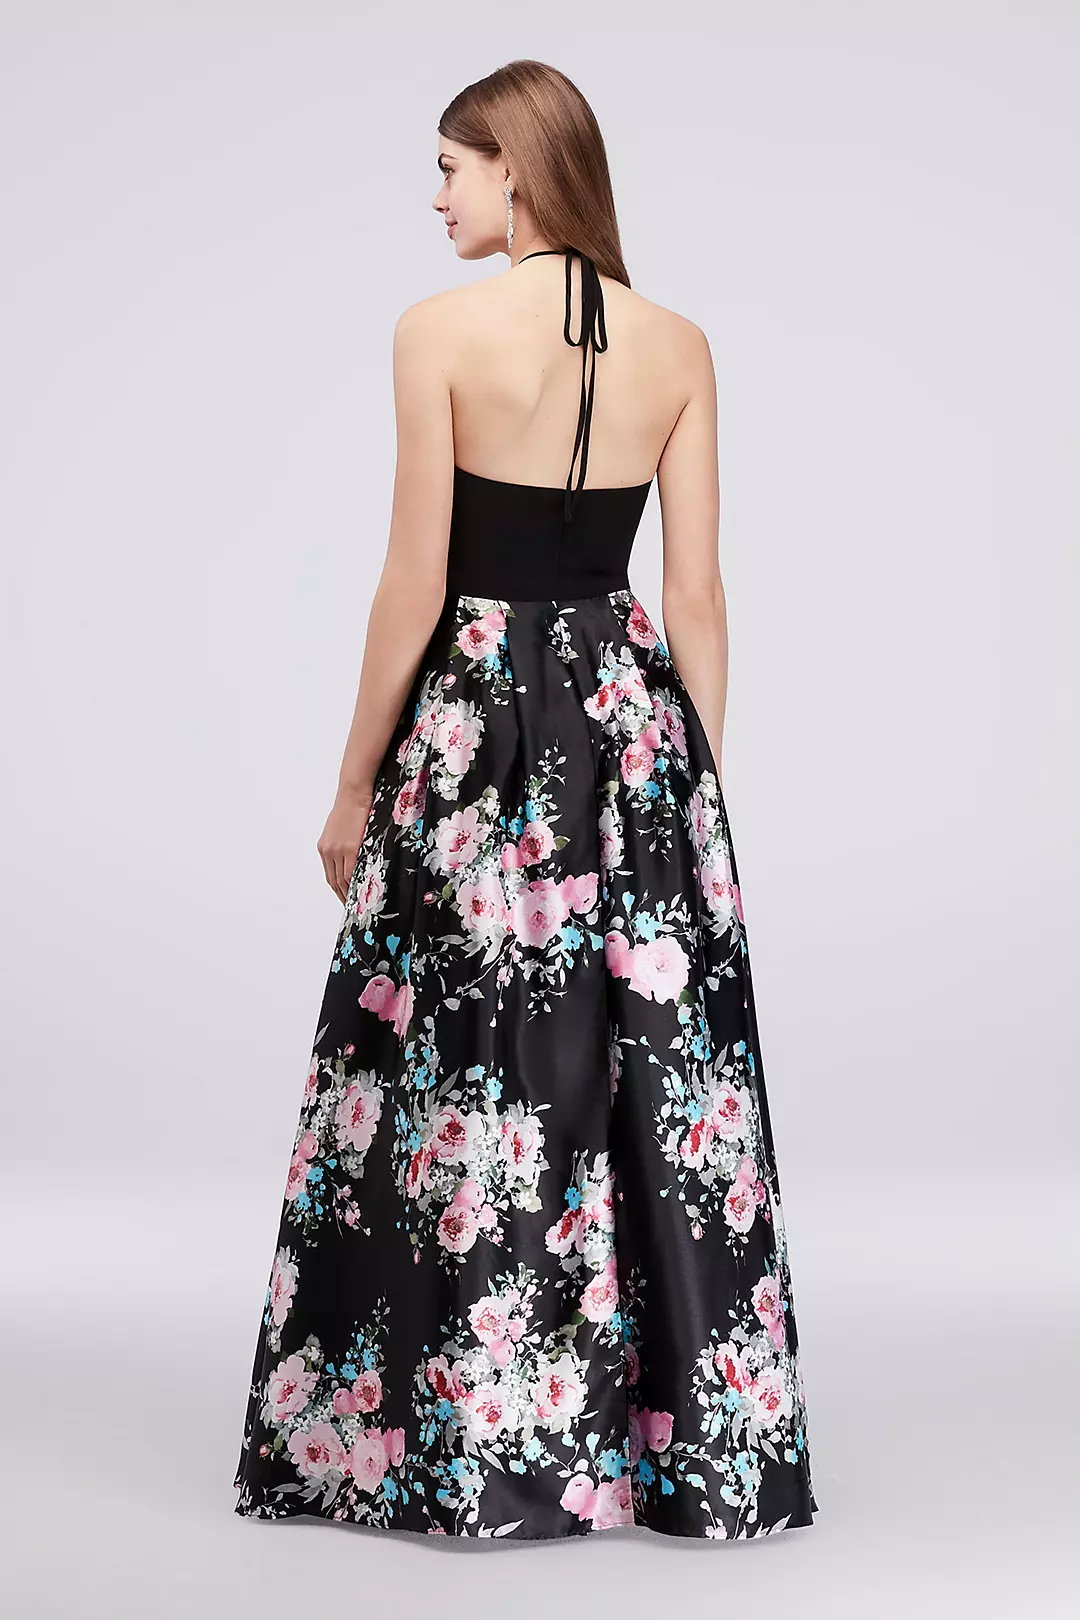 Jersey and Floral Satin Halter Ball Gown | David's Bridal